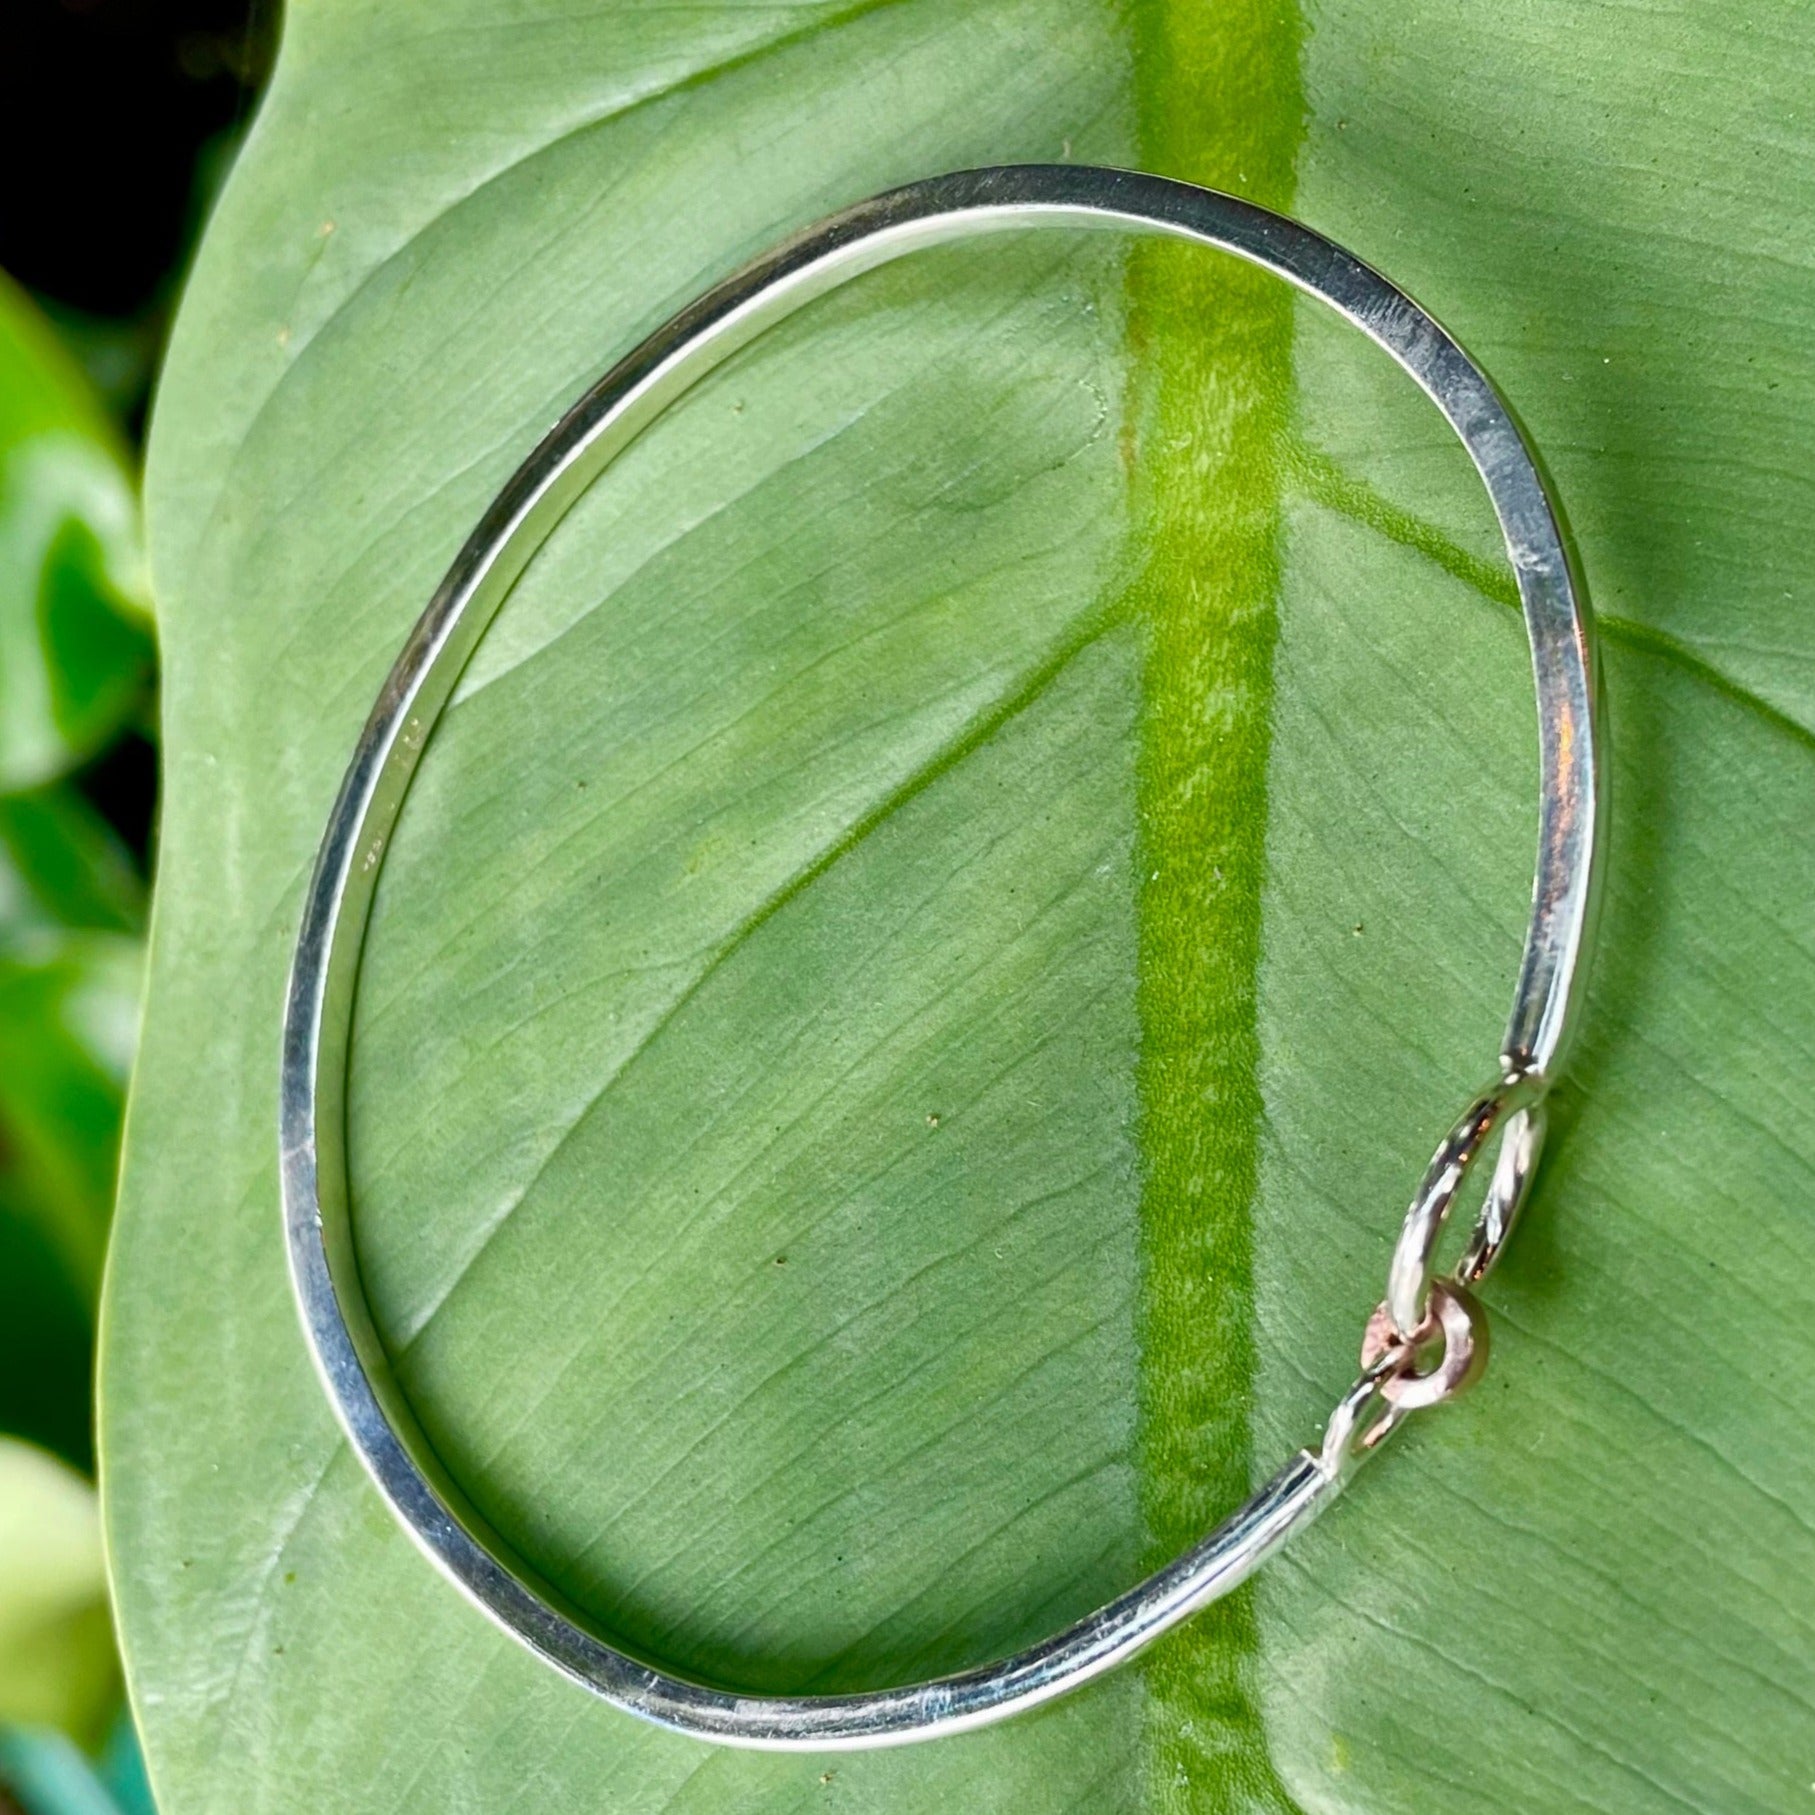 McKenna Kay Designs- sterling silver bangle called-"Connect"